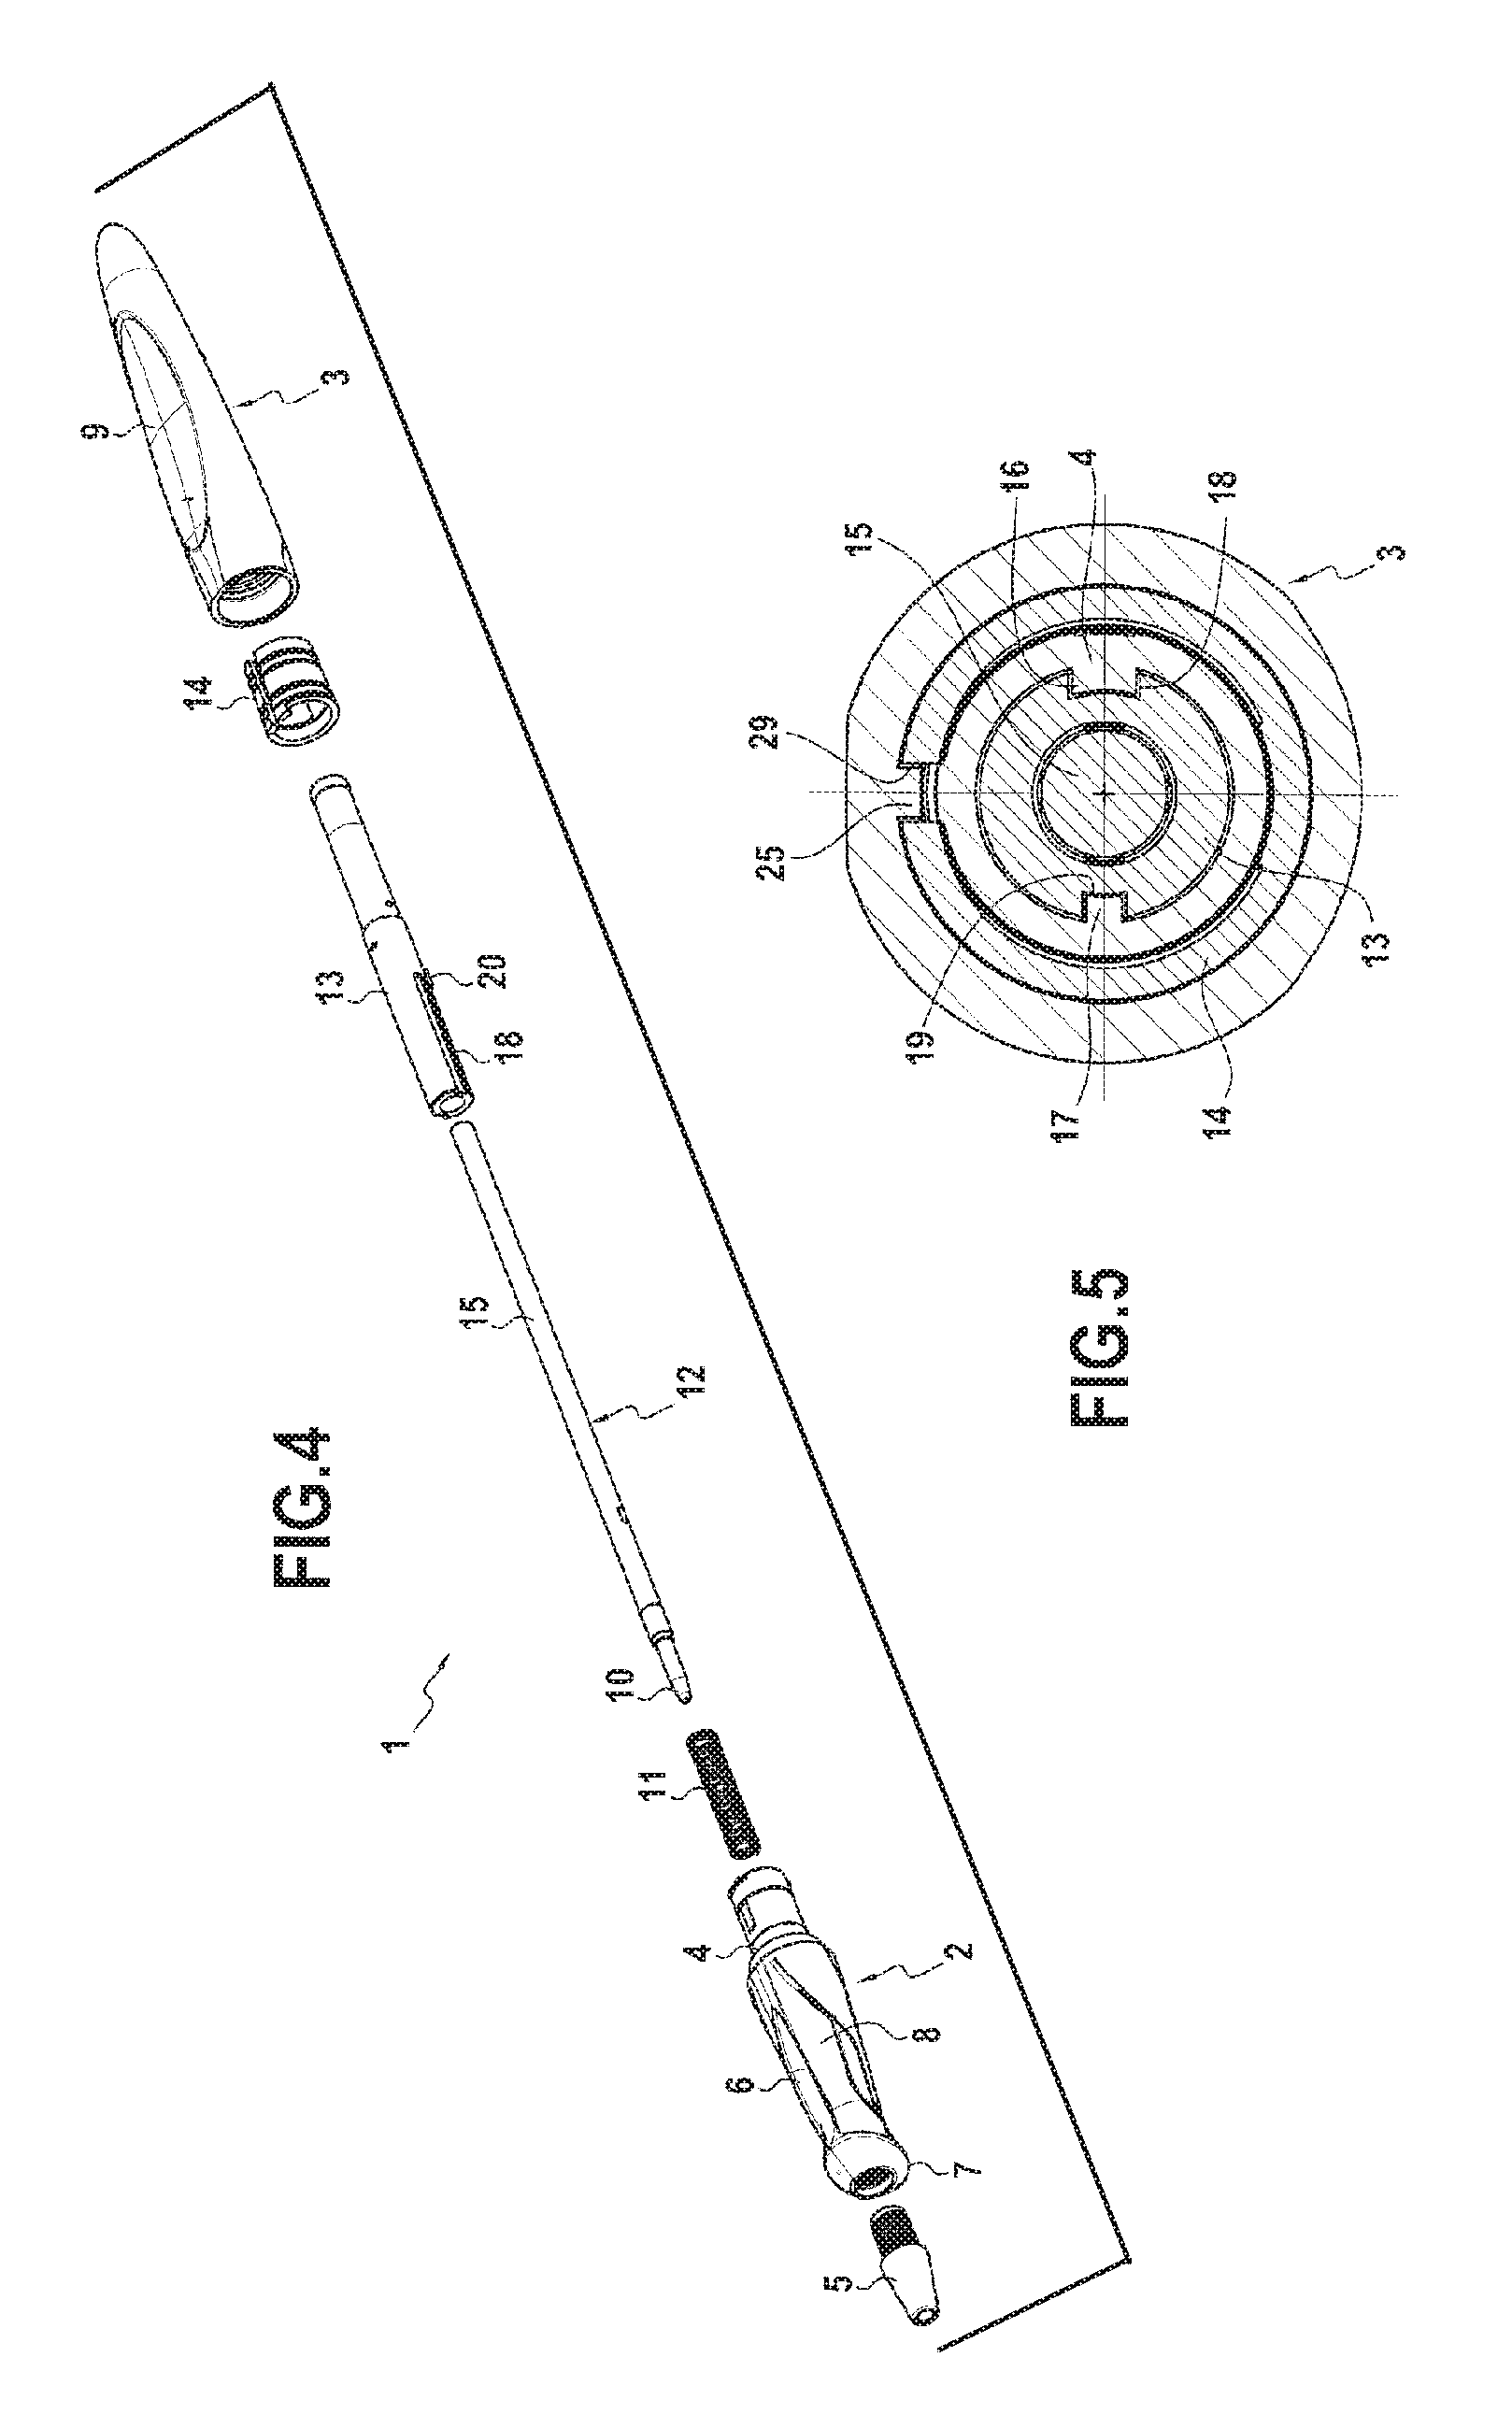 Writing instrument with simplified assembly